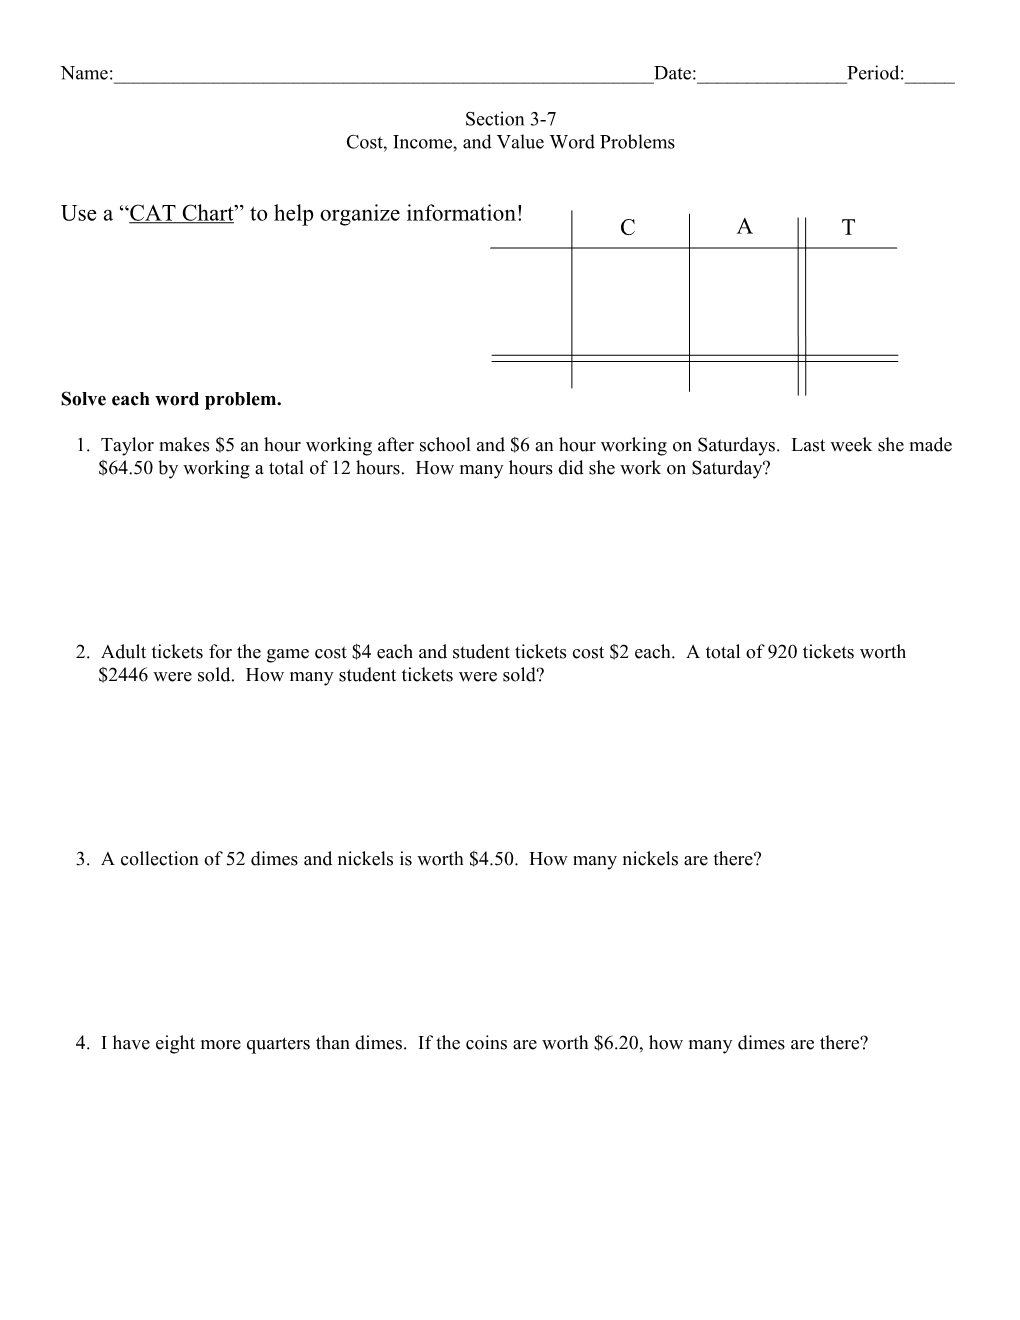 Cost, Income, and Value Word Problems